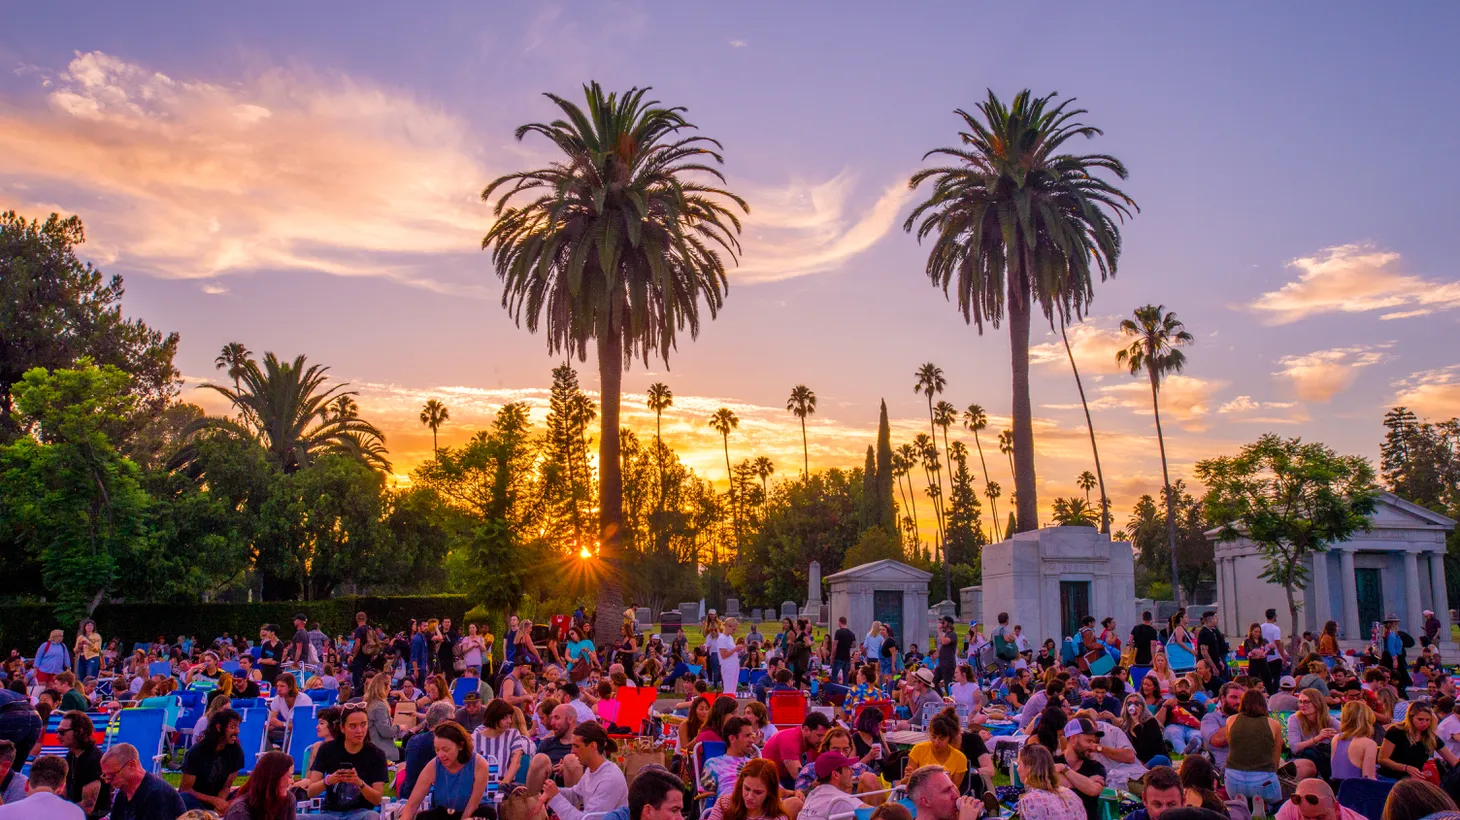 “People really want something that grabs their attention, sucks them in, entertains them. Luckily, Hollywood classics have all of that. And the greatest ones still have a lot of power to move people,” says Cinespia founder John Wyatt about the summer screening series.